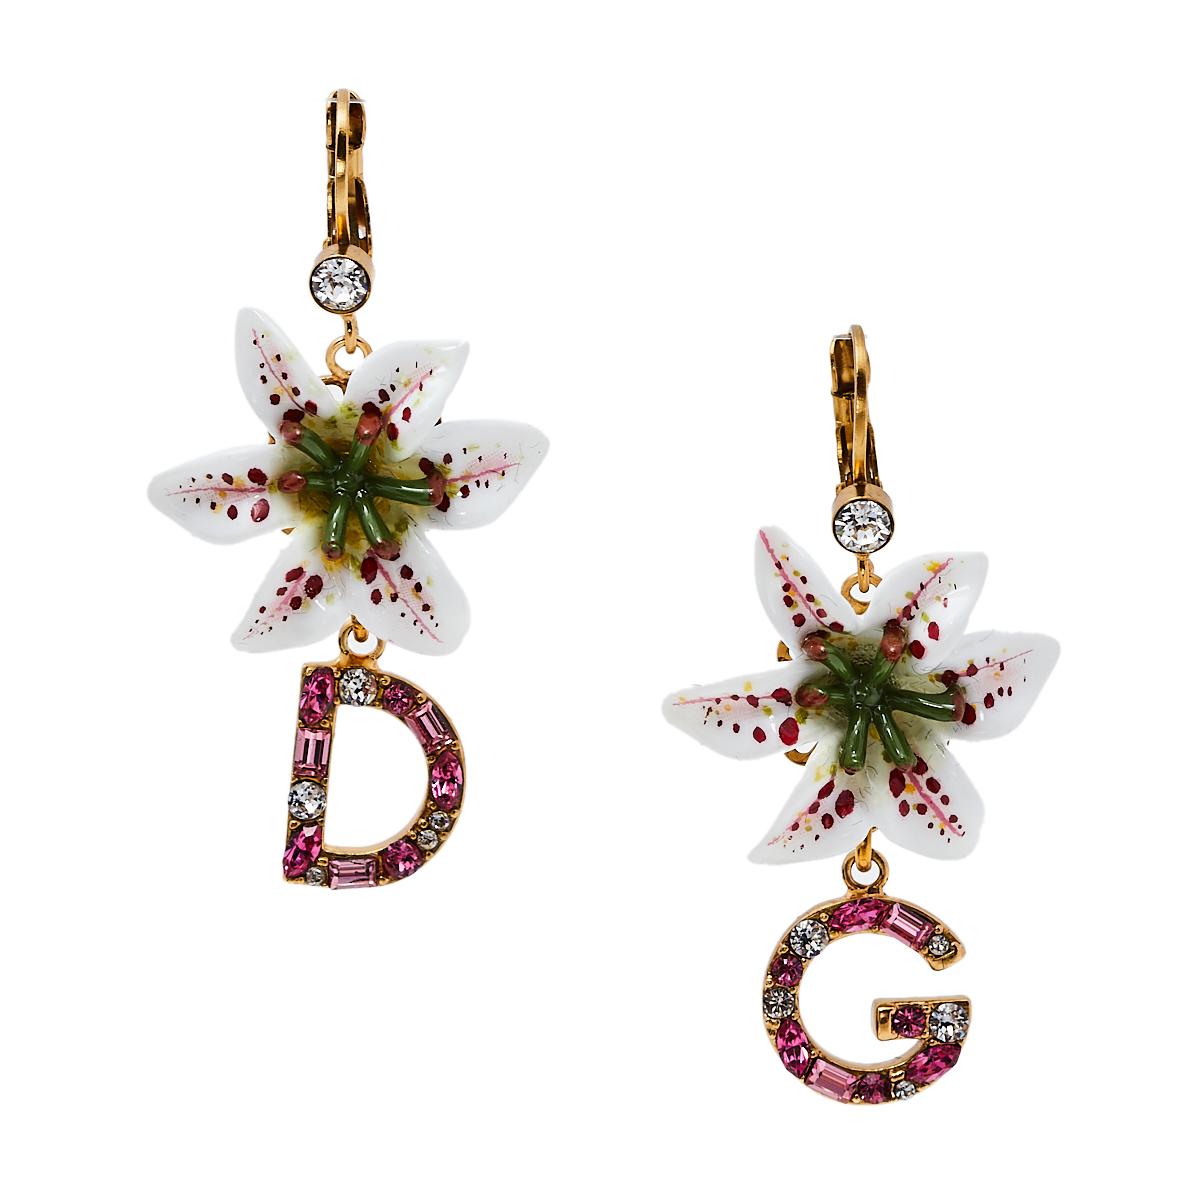 Dolce & Gabbana's collections are a testament to the label's opulent and glamorous aesthetics. These earrings are made from gold-tone metal and feature the lily motifs reflecting the label's love for floral motifs. For the finishing signature touch,